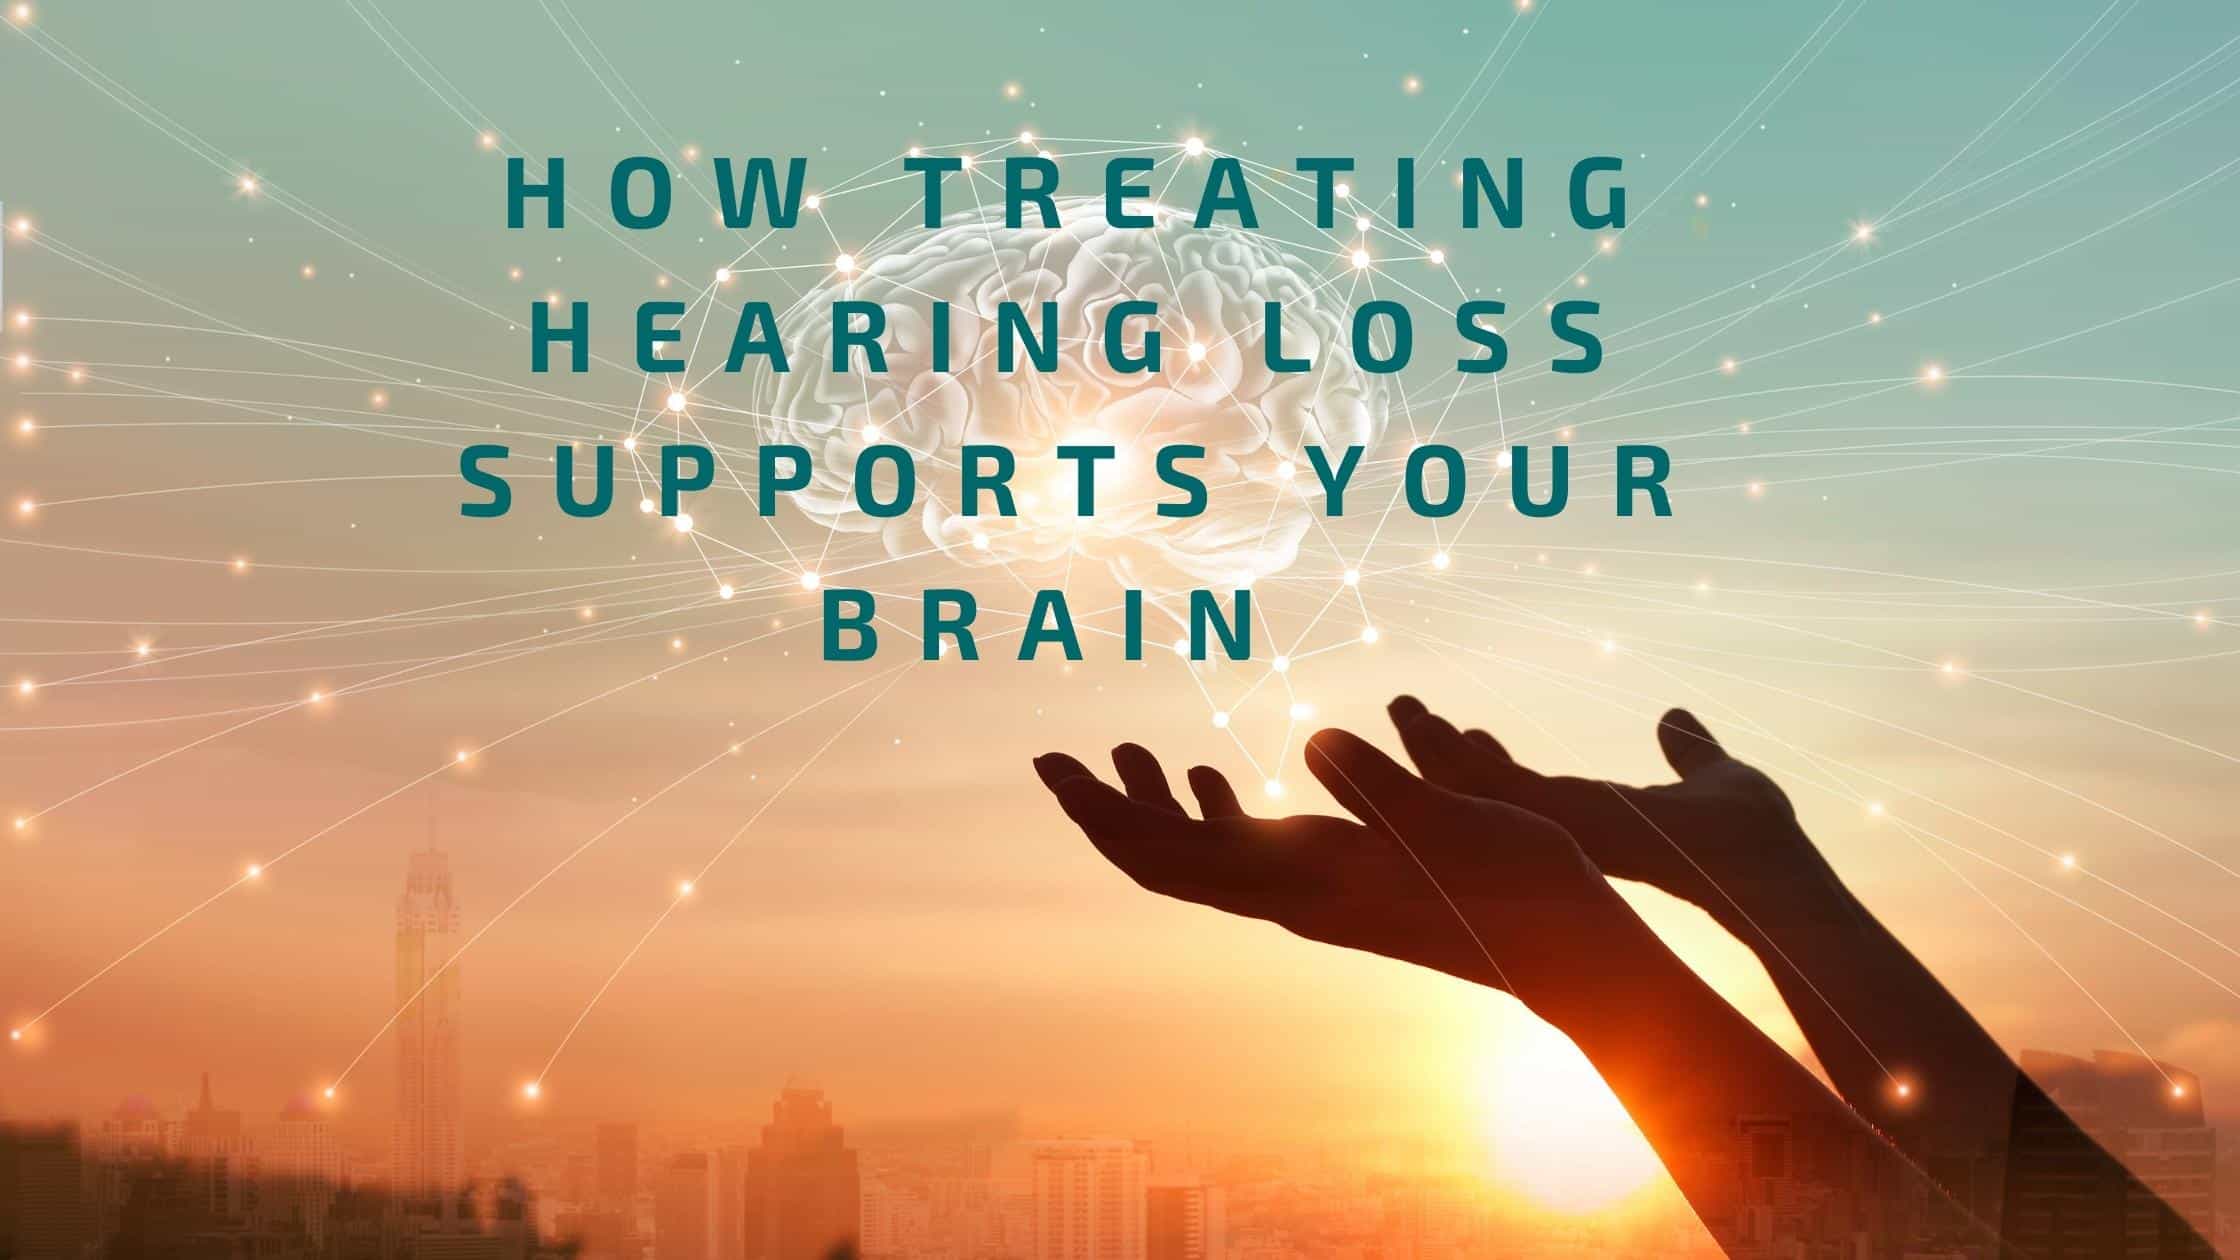 Featured image for “How Treating Hearing Loss Supports Your Brain”